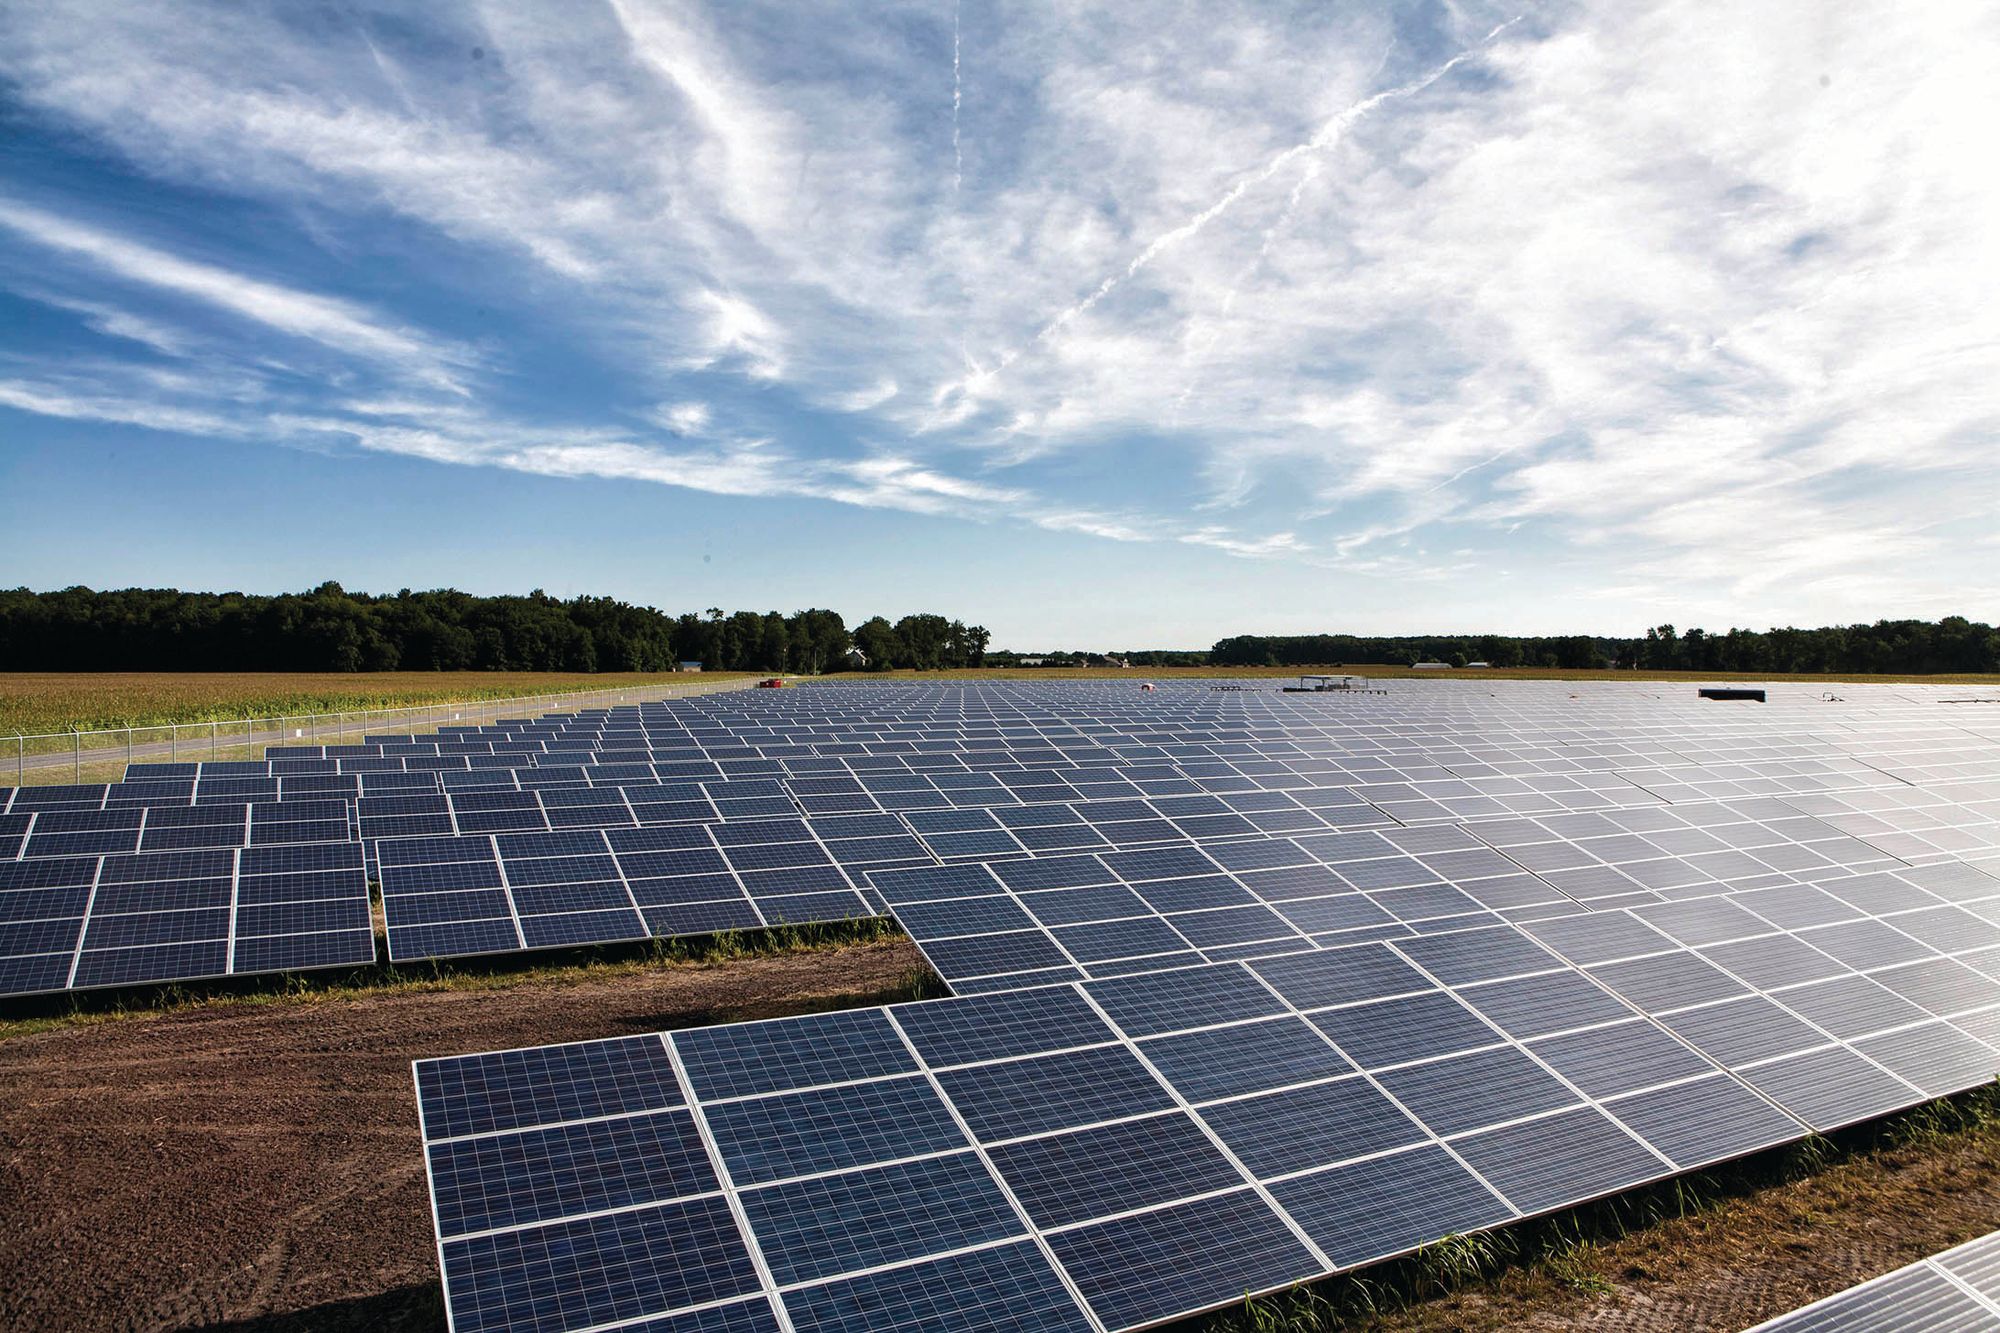 A new solar farm near Greenwood is one of a slew of projects planned